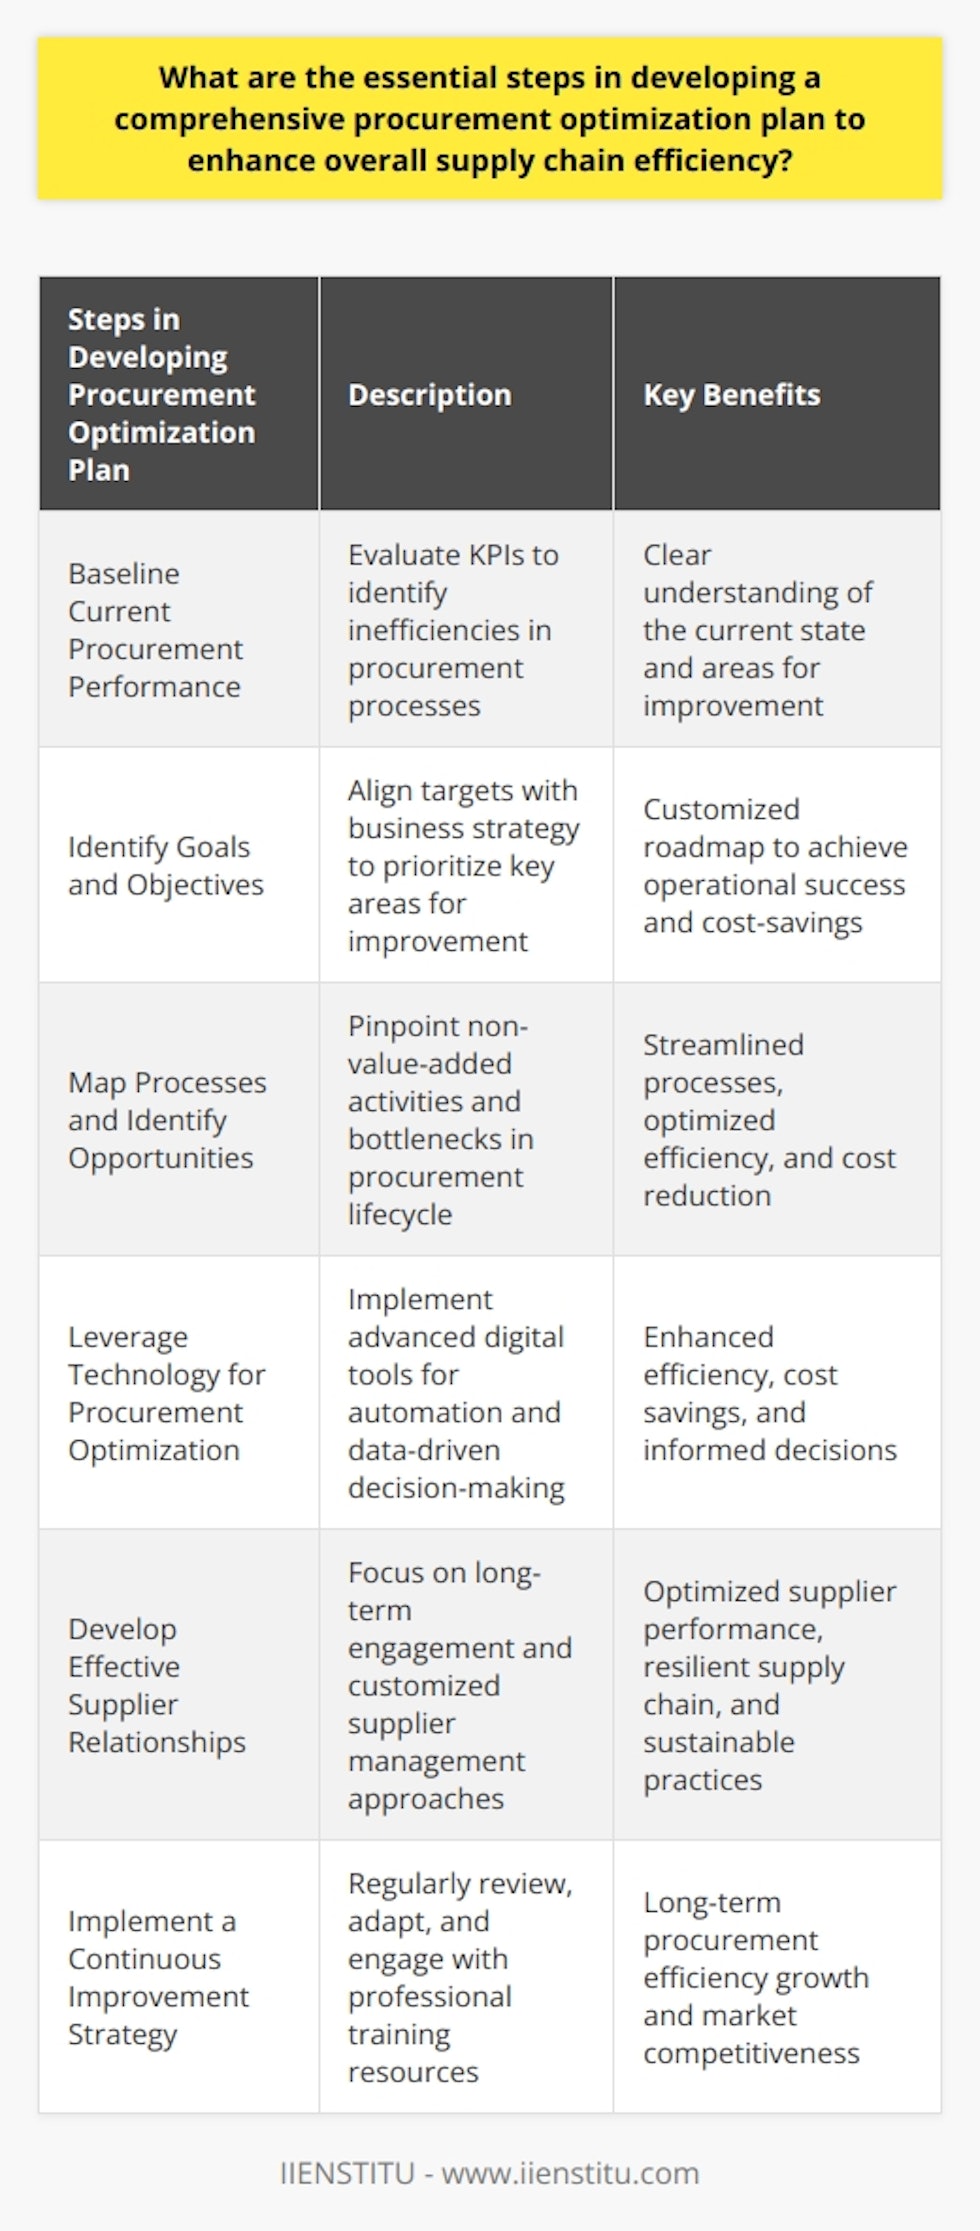 Developing a comprehensive procurement optimization plan is paramount for ensuring a responsive and efficient supply chain. Here's a roadmap that organizations can follow to accomplish this goal:**Baseline Current Procurement Performance**The initial step involves a thorough analysis of the current procurement processes. This entails evaluating various KPIs that track the efficiency and effectiveness of procurement activities. For example, assessing metrics like average procurement cycle length, cost per purchase order, and percentage of maverick spend provides a clear picture of the existing state and highlights inefficiencies.**Identify Goals and Objectives**Building on the analysis, precise goals and objectives need to be set. It's necessary to tailor these targets to align with the company's broader business strategy and operational necessities. Analyzing spend data with a focus on cost-reduction opportunities, exploring ways to increase procurement agility, and enhancing supplier risk management are some areas that could be prioritized.**Map Processes and Identify Opportunities**A meticulous mapping of procurement processes helps identify non-value-added activities and bottlenecks. This map encompasses the end-to-end lifecycle involving steps like requisition, sourcing, ordering, receiving, and payment processing. Opportunities for improvement often lie in eliminating redundant steps, simplifying approval hierarchies, and standardizing operations.**Leverage Technology for Procurement Optimization**Leveraging technology is integral to modern procurement optimization. Advanced digital tools facilitate electronic procurement (e-procurement), automate routine tasks, and enable sophisticated data analysis. These tools not only increase efficiency and cut costs but also help in making informed decisions through predictive and prescriptive analytics.**Develop Effective Supplier Relationships**Cultivating strategic relationships with key suppliers can lead to mutual benefits. This involves shifting from transaction-based interactions to a focus on long-term relational engagement. Segmenting suppliers and customizing the management approach can optimize supplier performance and create a more resilient supply chain. Additionally, considering the sustainability practices of suppliers is becoming increasingly important.**Implement a Continuous Improvement Strategy**Adapting to changes and seeking improvement should be an ongoing effort. Regularly scheduled reviews, feedback loops, and adaptation of best practices play a prominent role. This also includes looking beyond immediate procurement functions and considering the broader supply ecosystem's influence on procurement efficiency.It should be noted that engaging with organizations that offer specialized supply chain and procurement training, such as IIENSTITU, can provide valuable insights and augment an organization's capability to develop and implement a successful procurement optimization plan.In conclusion, a comprehensive procurement optimization plan is a multi-step journey that requires constant assessment and realignment. By focusing on baseline assessments, clear objectives, process streamlining, technological enablement, supplier relationships, and continuous improvement, organizations can enhance supply chain efficiency and gain a competitive advantage in the marketplace.